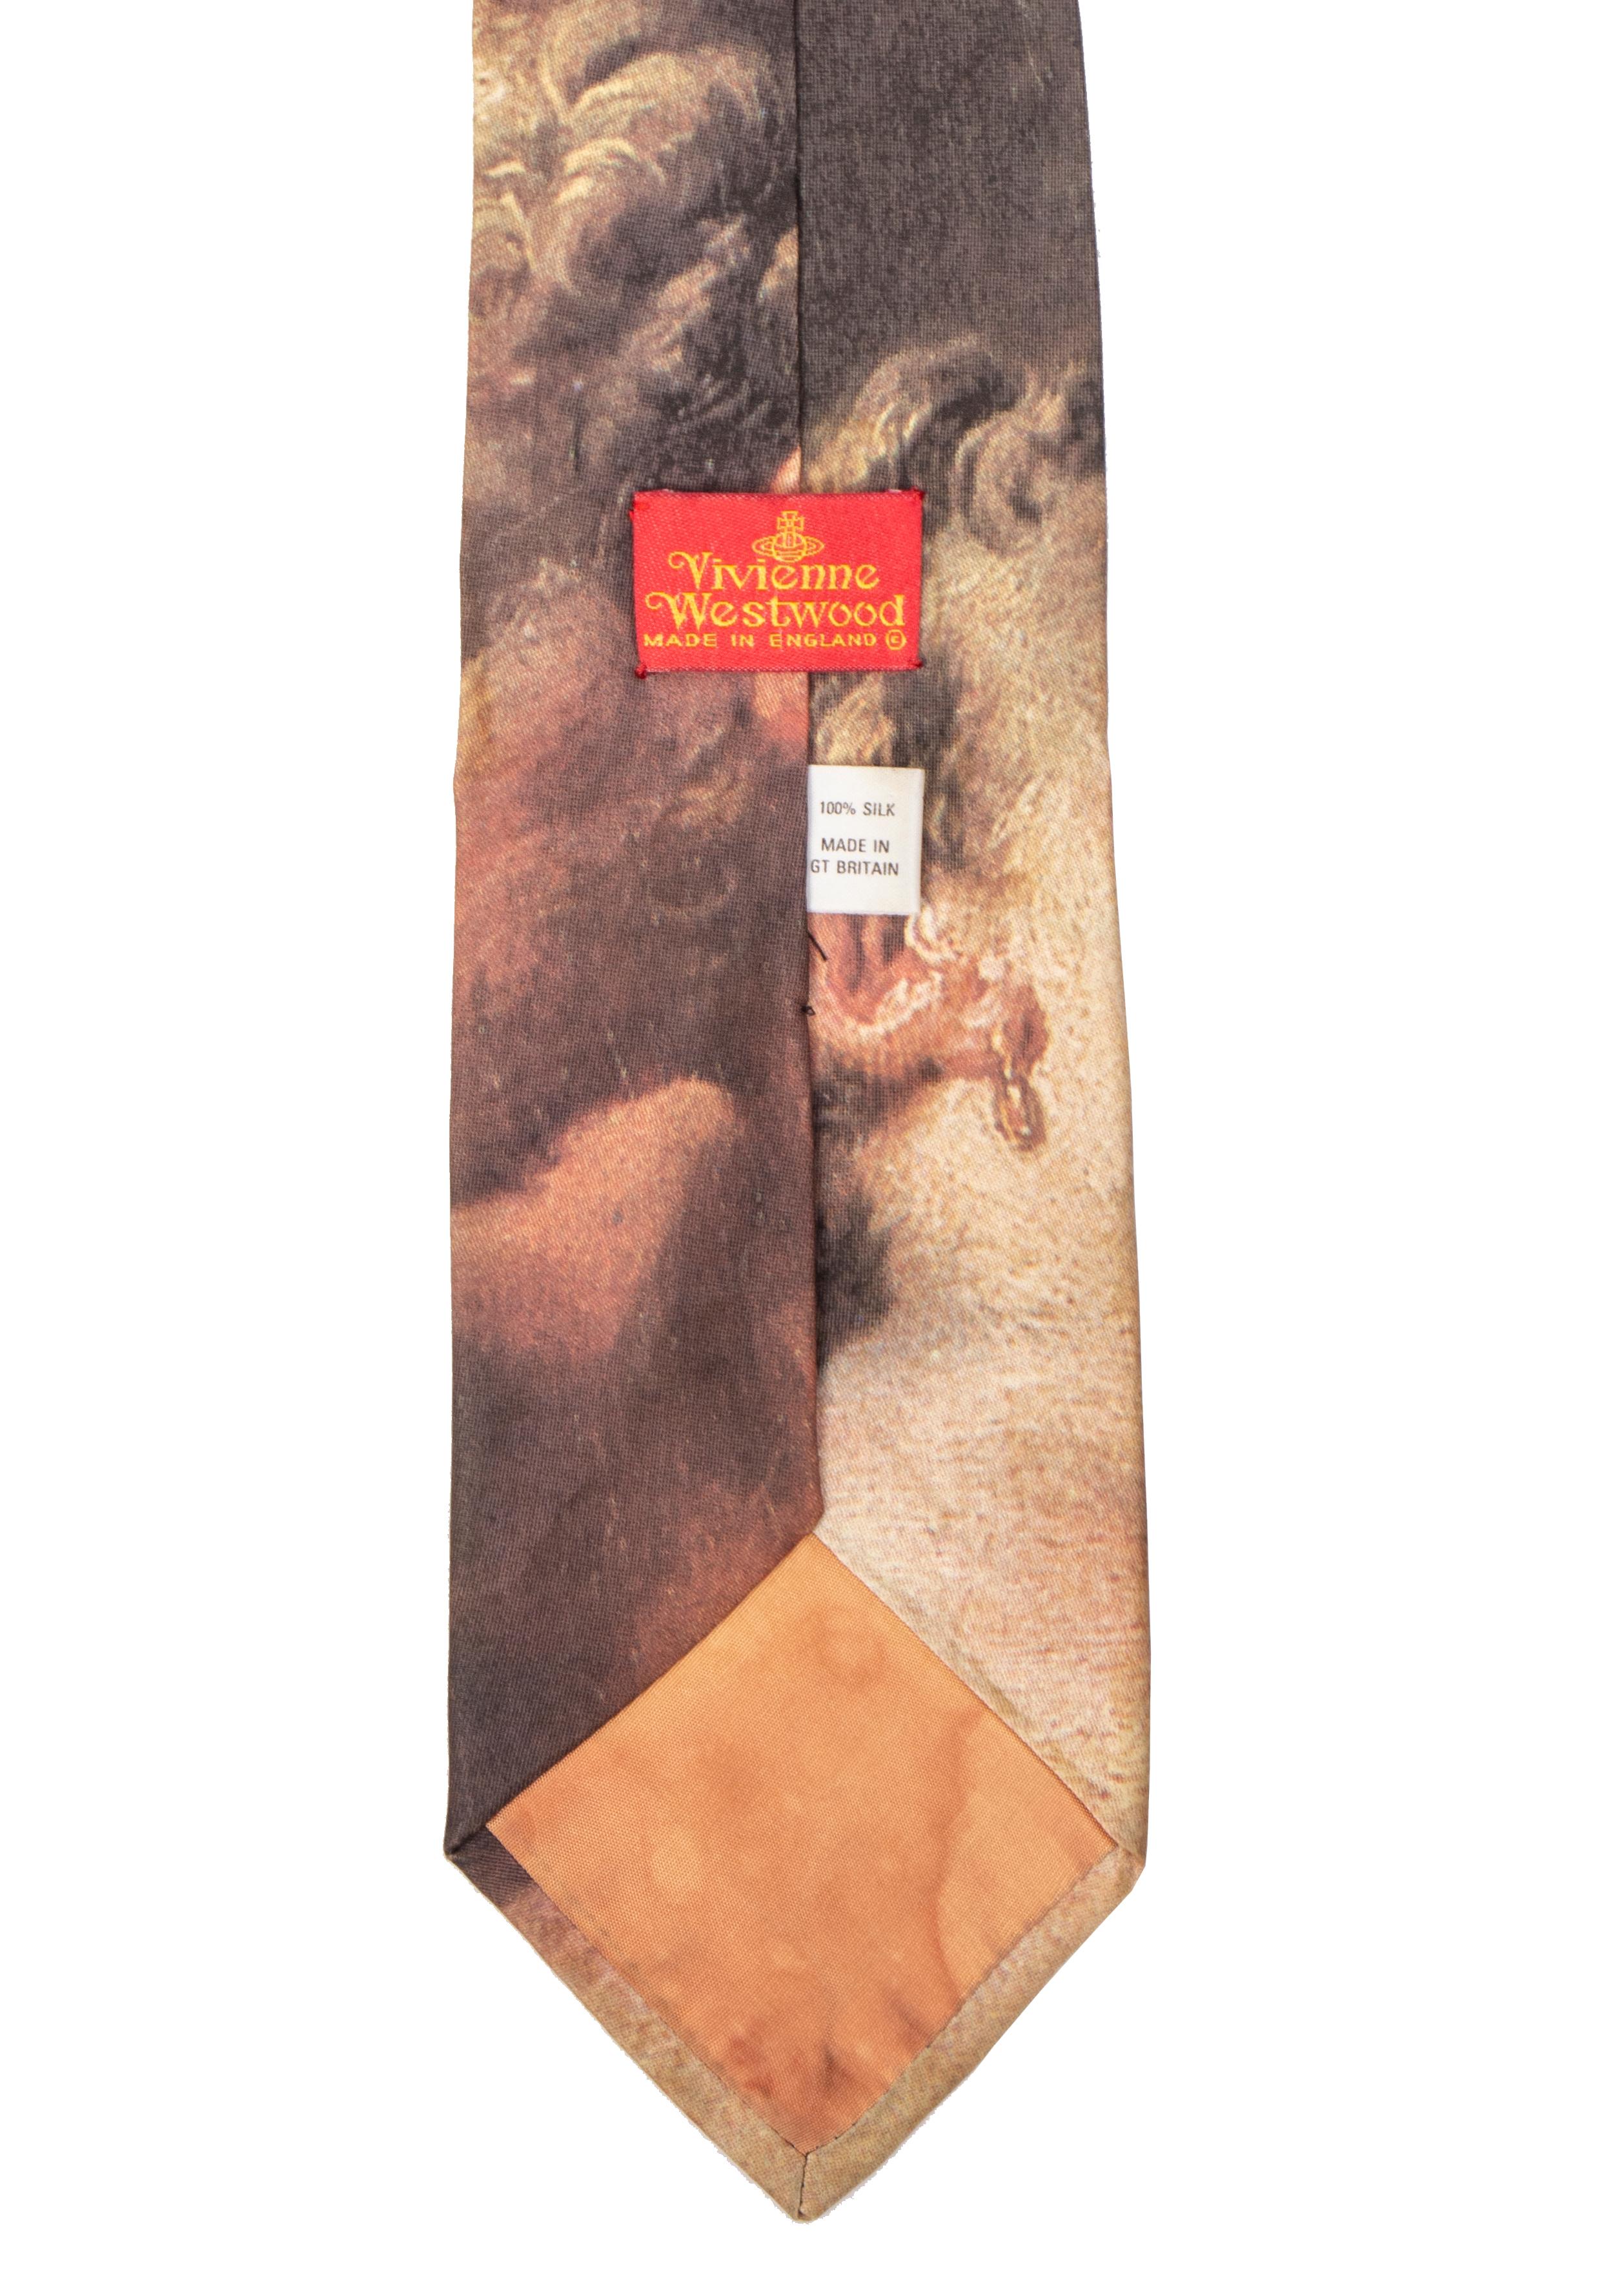 A Vivienne Westwood “Grand Hotel” tie, Spring-Summer 1993. Similar to her portrait printed garments debuted in Autumn-Winter 1990, the painting ‘Hercules and Omphale’ by Francois Boucher (c. 1732-1734) is featured across the entirety of the garment. 